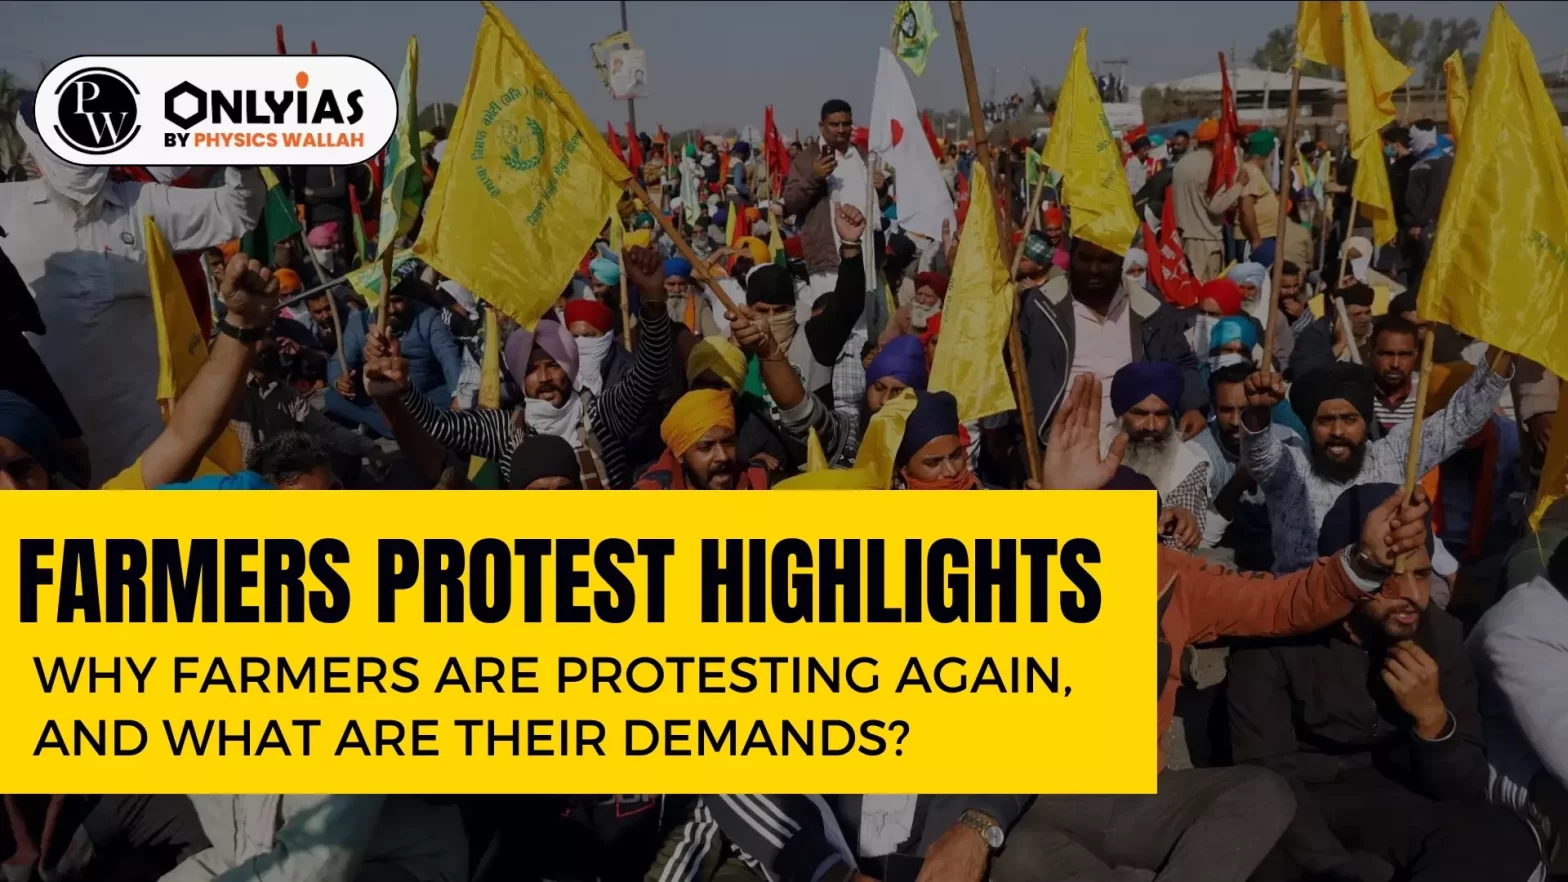 Farmers Protest Highlights: Why Farmers Are Protesting Again, and What Are Their Demands?